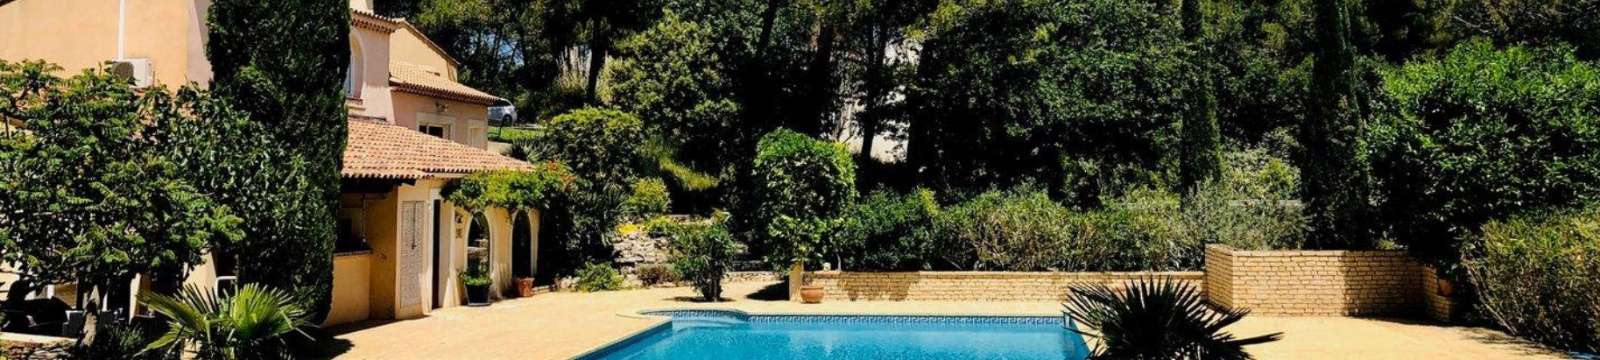 Le Roque Blanc holiday home